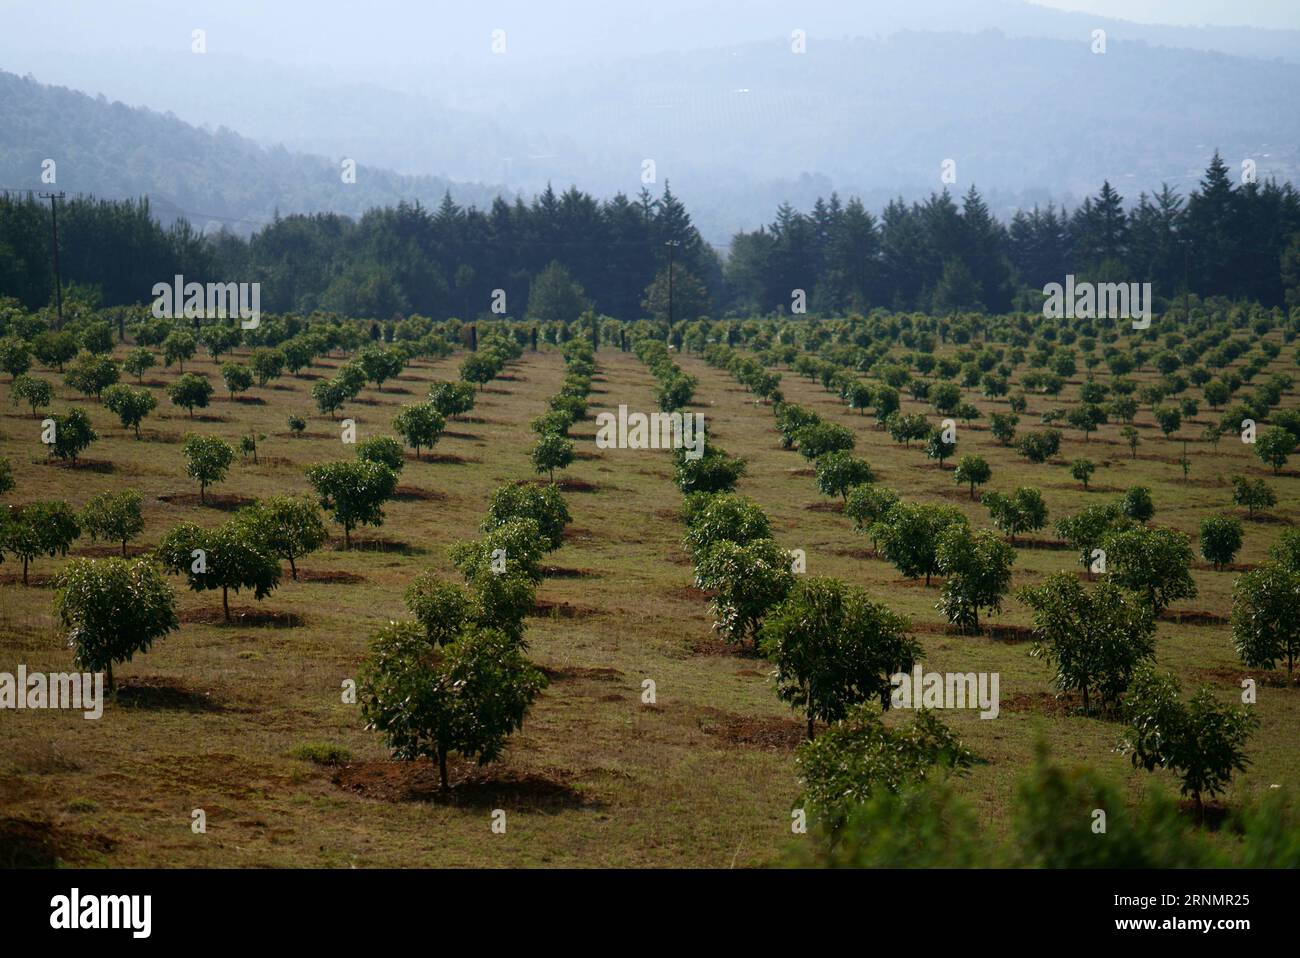 (170608) -- URUAPAN, June 8, 2017 -- Photo taken on June 3, 2017 shows an avocado orchard at Avo Hass, one of the eight avocado packing plants in Uruapanat, in the state of Michoacan, Mexico. Michoacan produced nearly 1.5 million tons of avocado in 2016, according to the federal government s annual agricultural records. Uruapan, accounted for 10.5 percent of the state s total production of the so-called green gold, as the vegetable-like fruit is called in Mexico. David de la Paz) (ma) (rtg)(gj) MEXICO-URUAPAN-AVOCADO e DavidxdexlaxPaz PUBLICATIONxNOTxINxCHN   Uruapan June 8 2017 Photo Taken ON Stock Photo